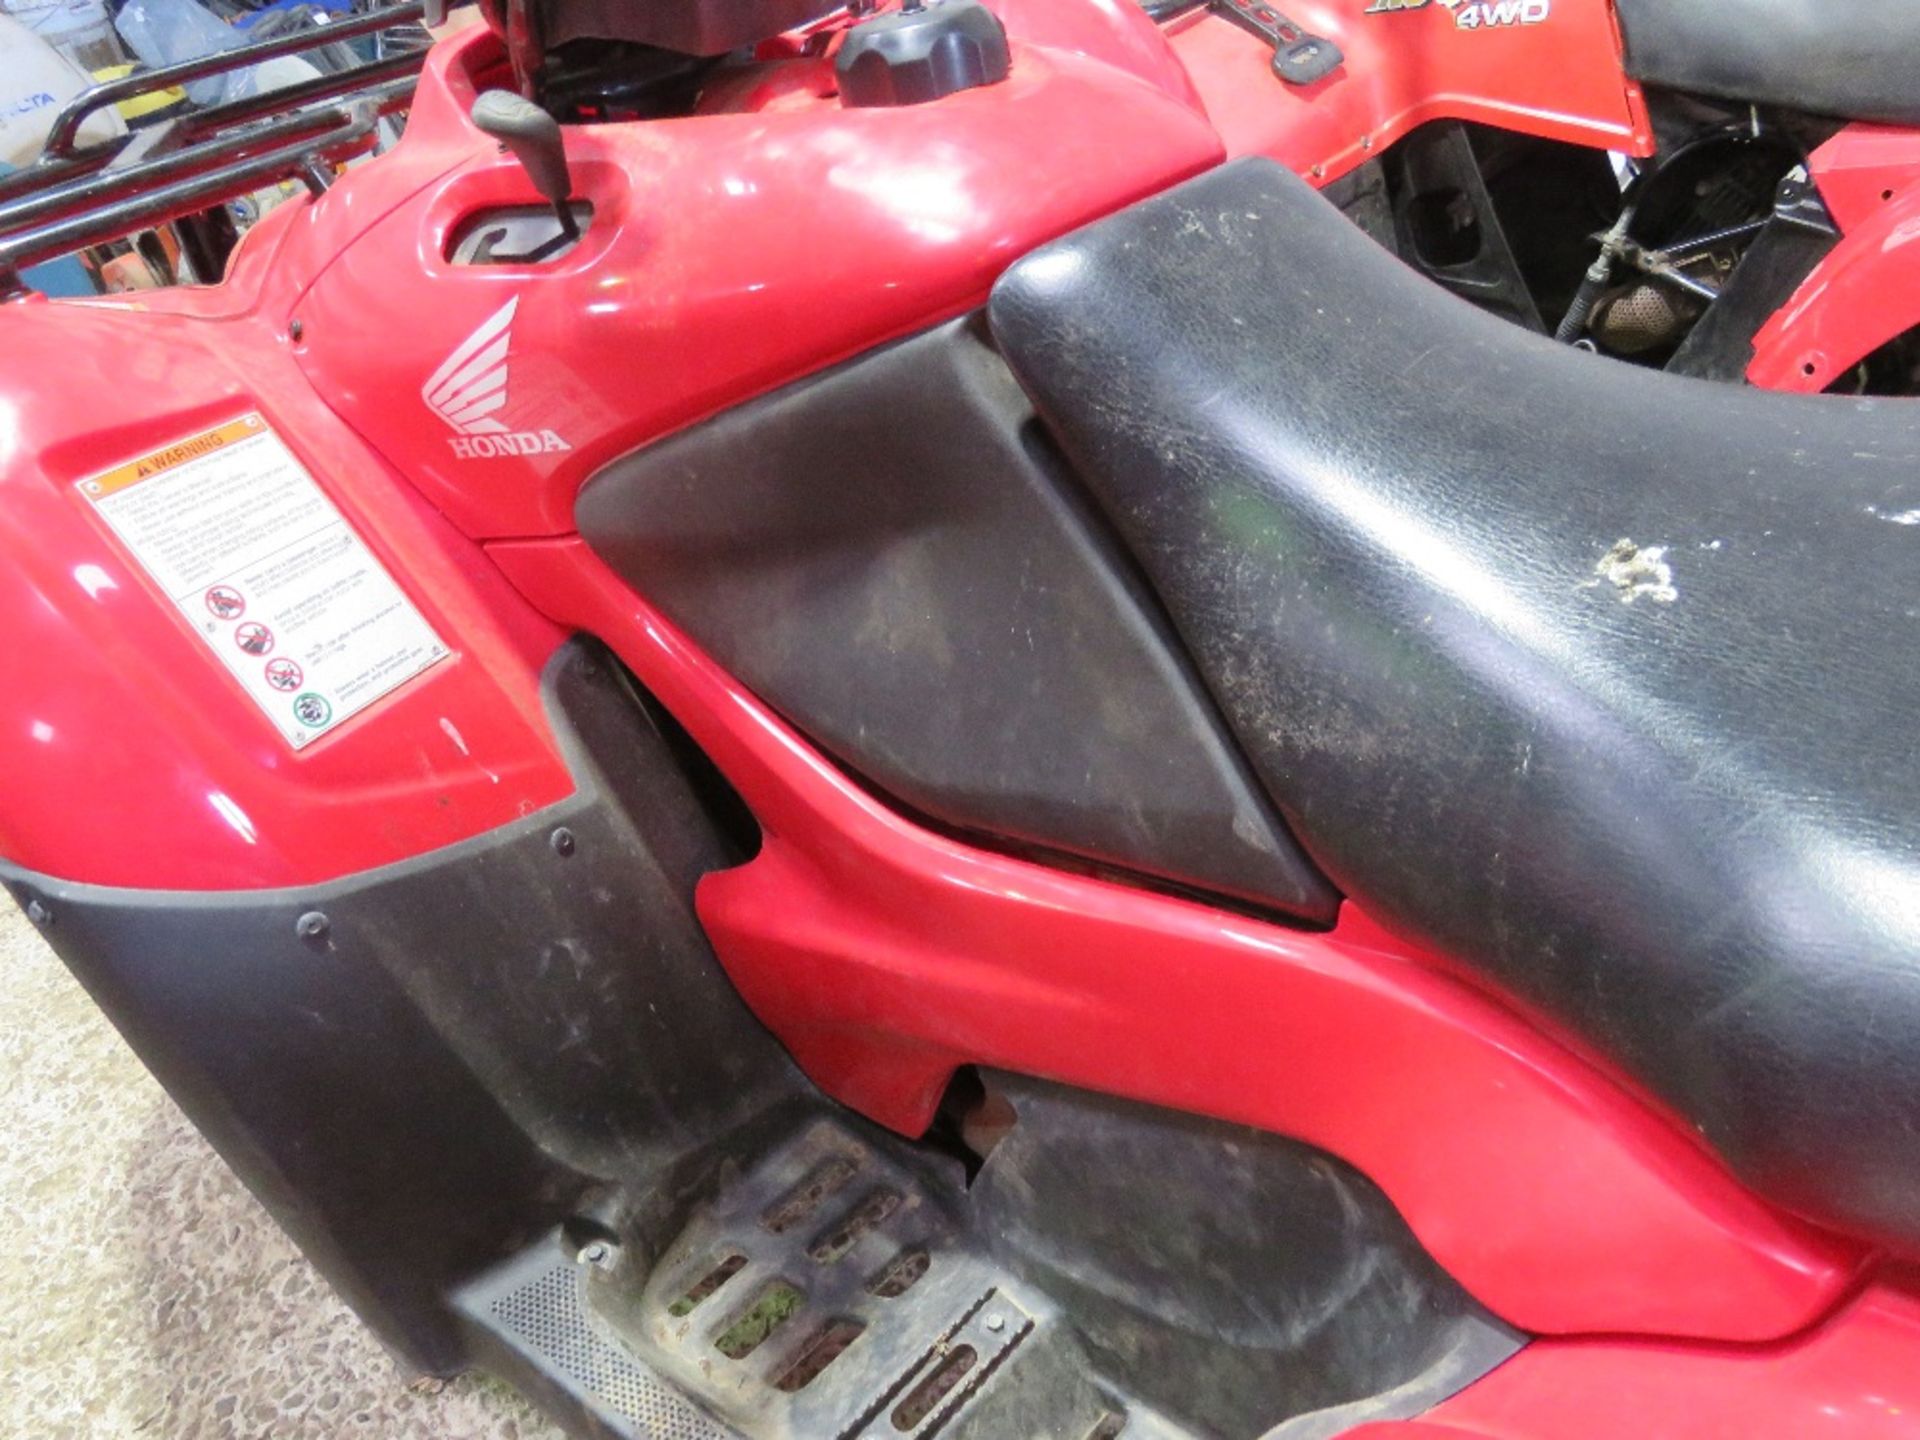 HONDA SELECTABLE 4 WHEEL DRIVE QUAD BIKE WITH ELECTRONIC GEAR SELECTION. WHEN TESTED WAS SEEN TO RUN - Image 10 of 11